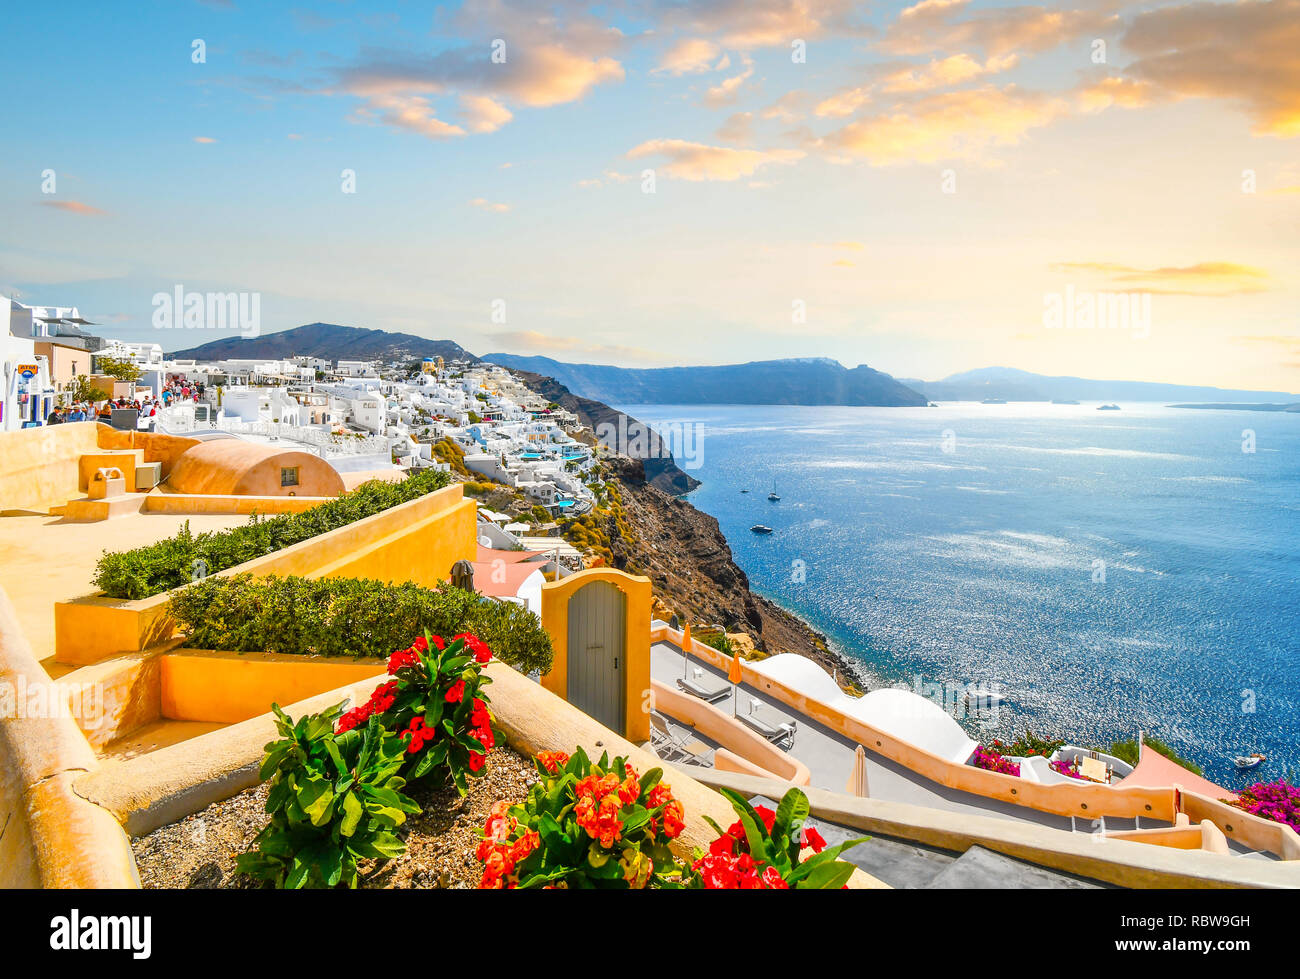 A picturesque scenic view of the Santorini caldera and the Aegean Sea from a resort terrace in the hillside village of Oia, Greece. Stock Photo